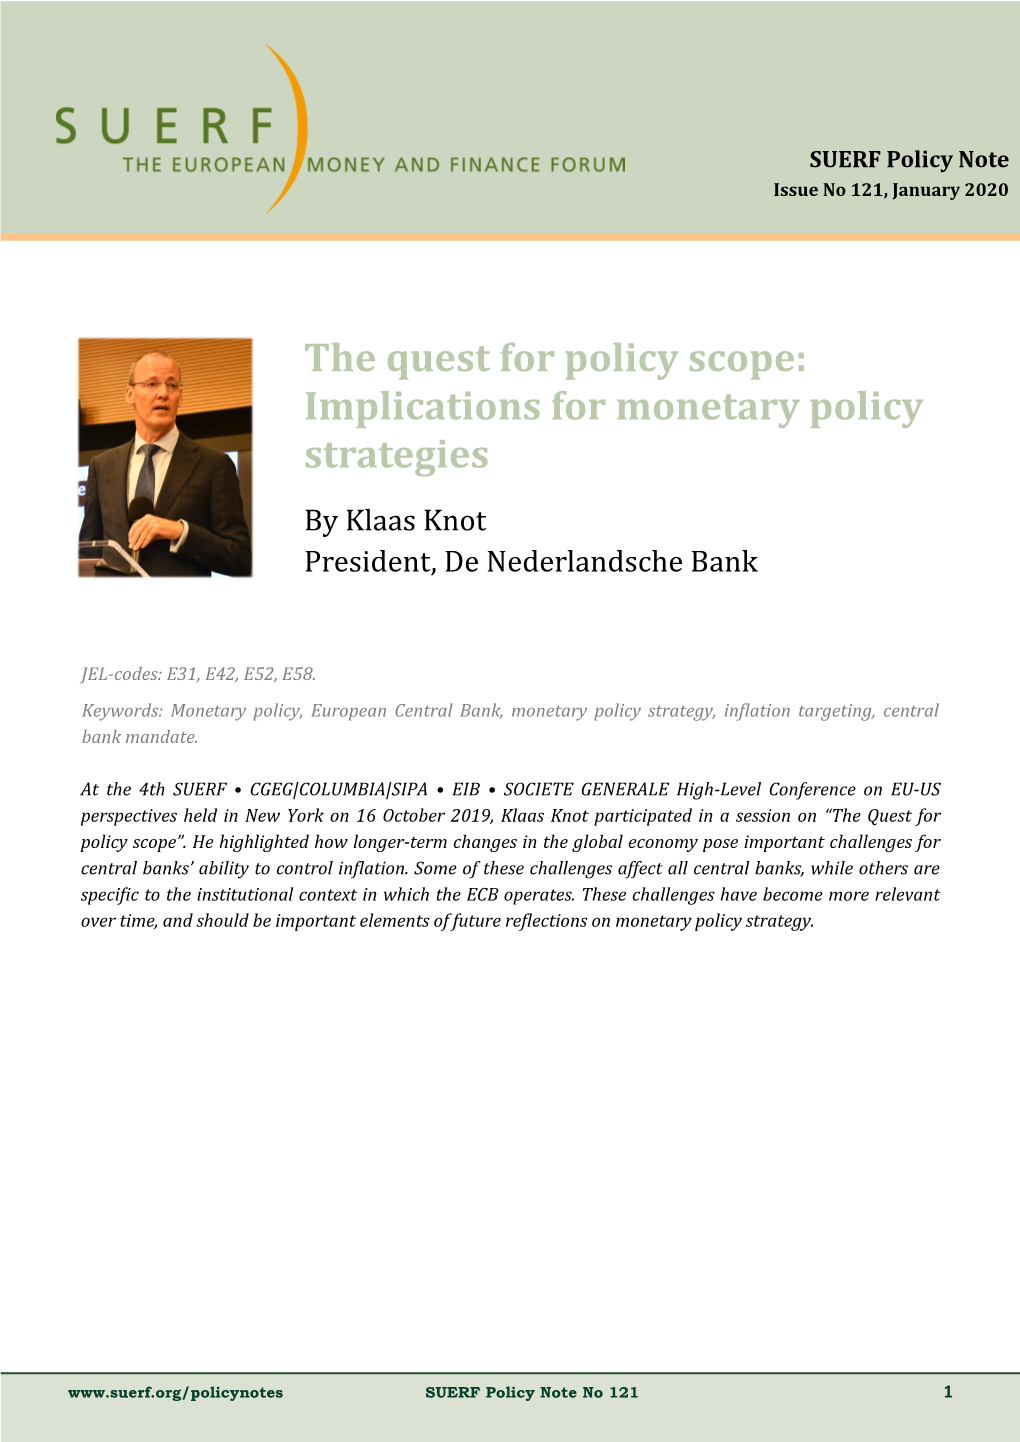 SUERF Policy Note, Issue No